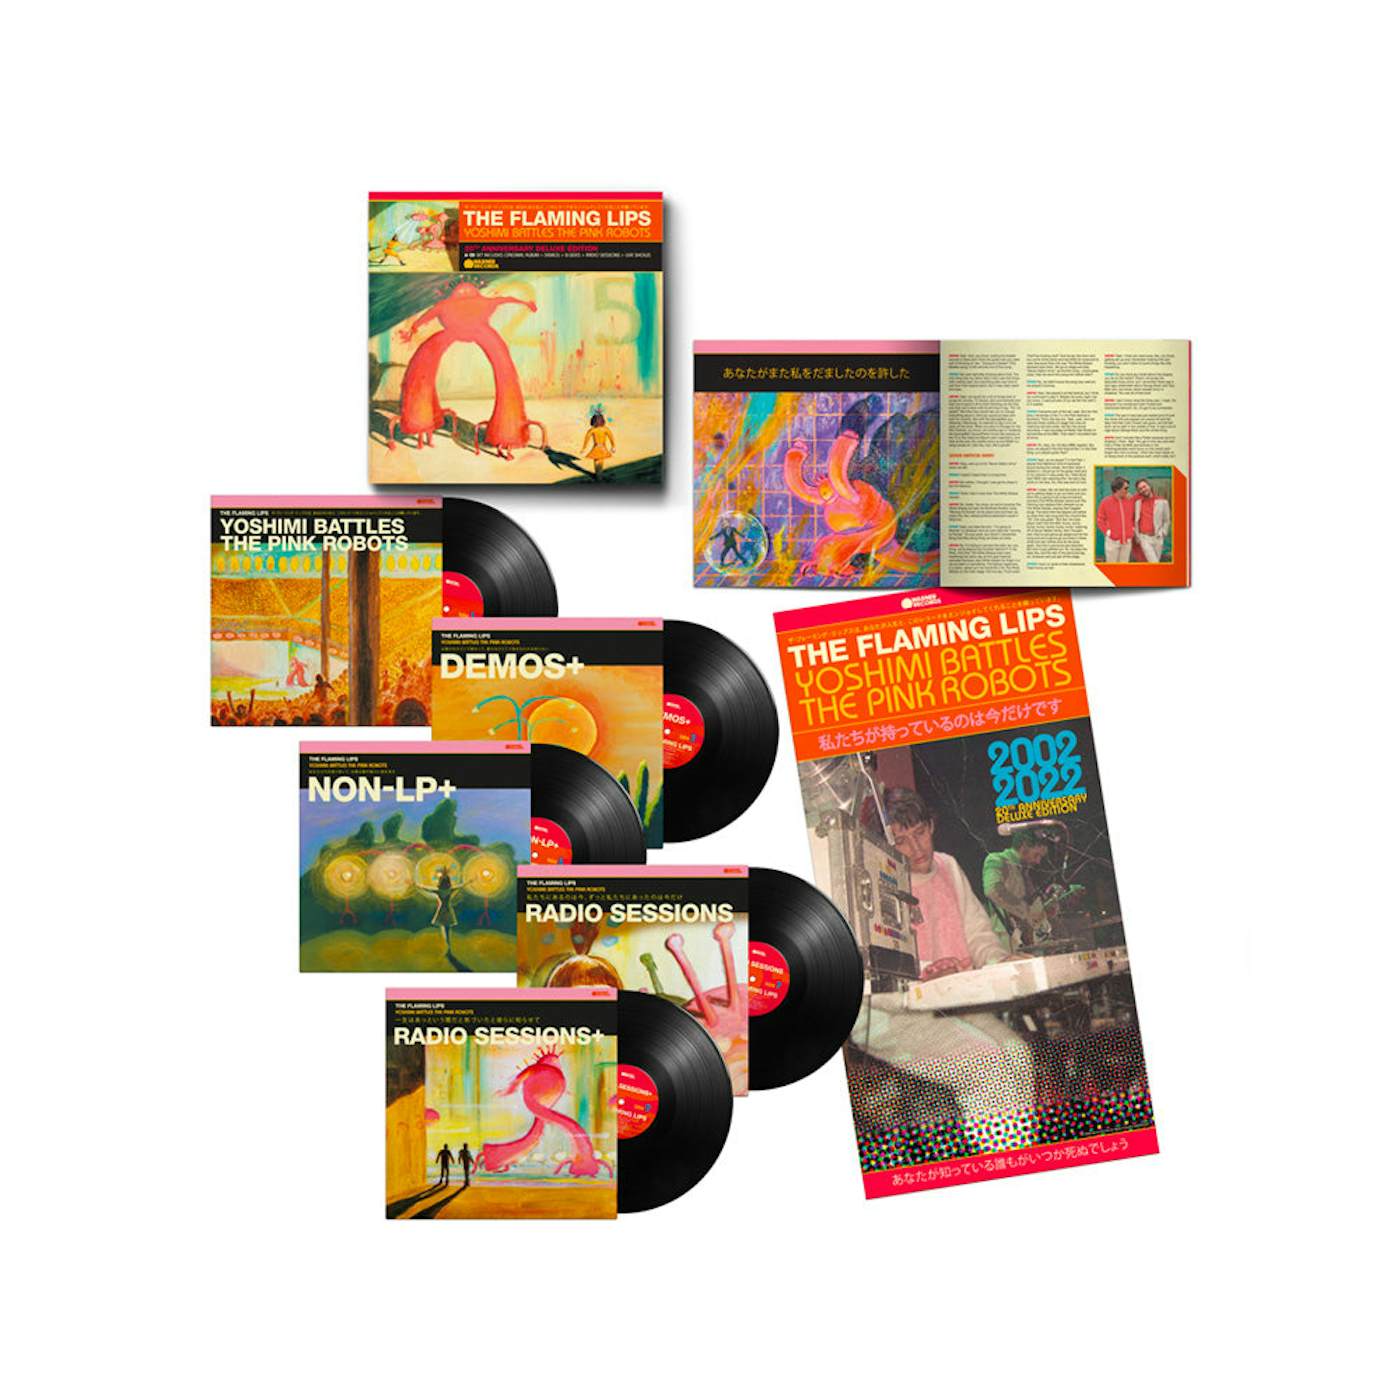 The Flaming Lips oshimi Battles the Pink Robots (20th Anniversary Super Deluxe Edition) [5LP]